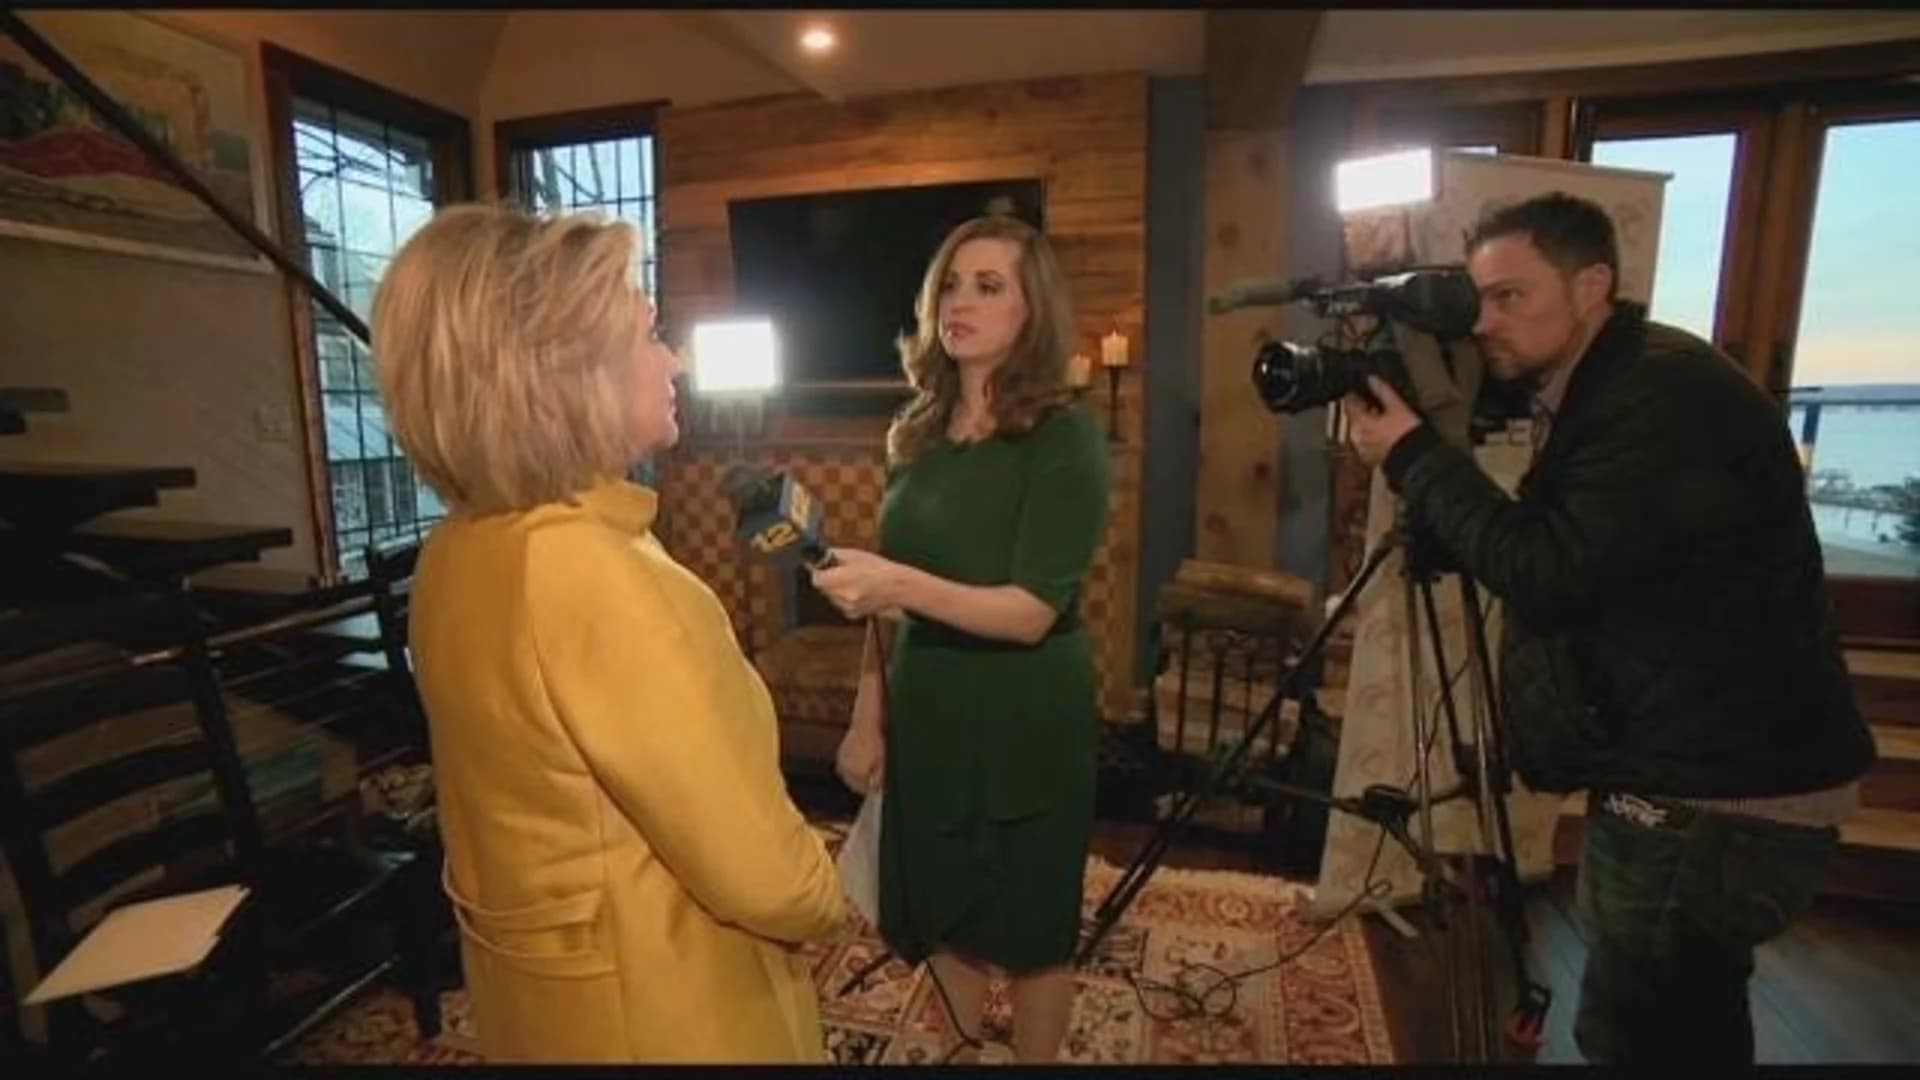 News 12's exclusive with Hillary Clinton circles the globe